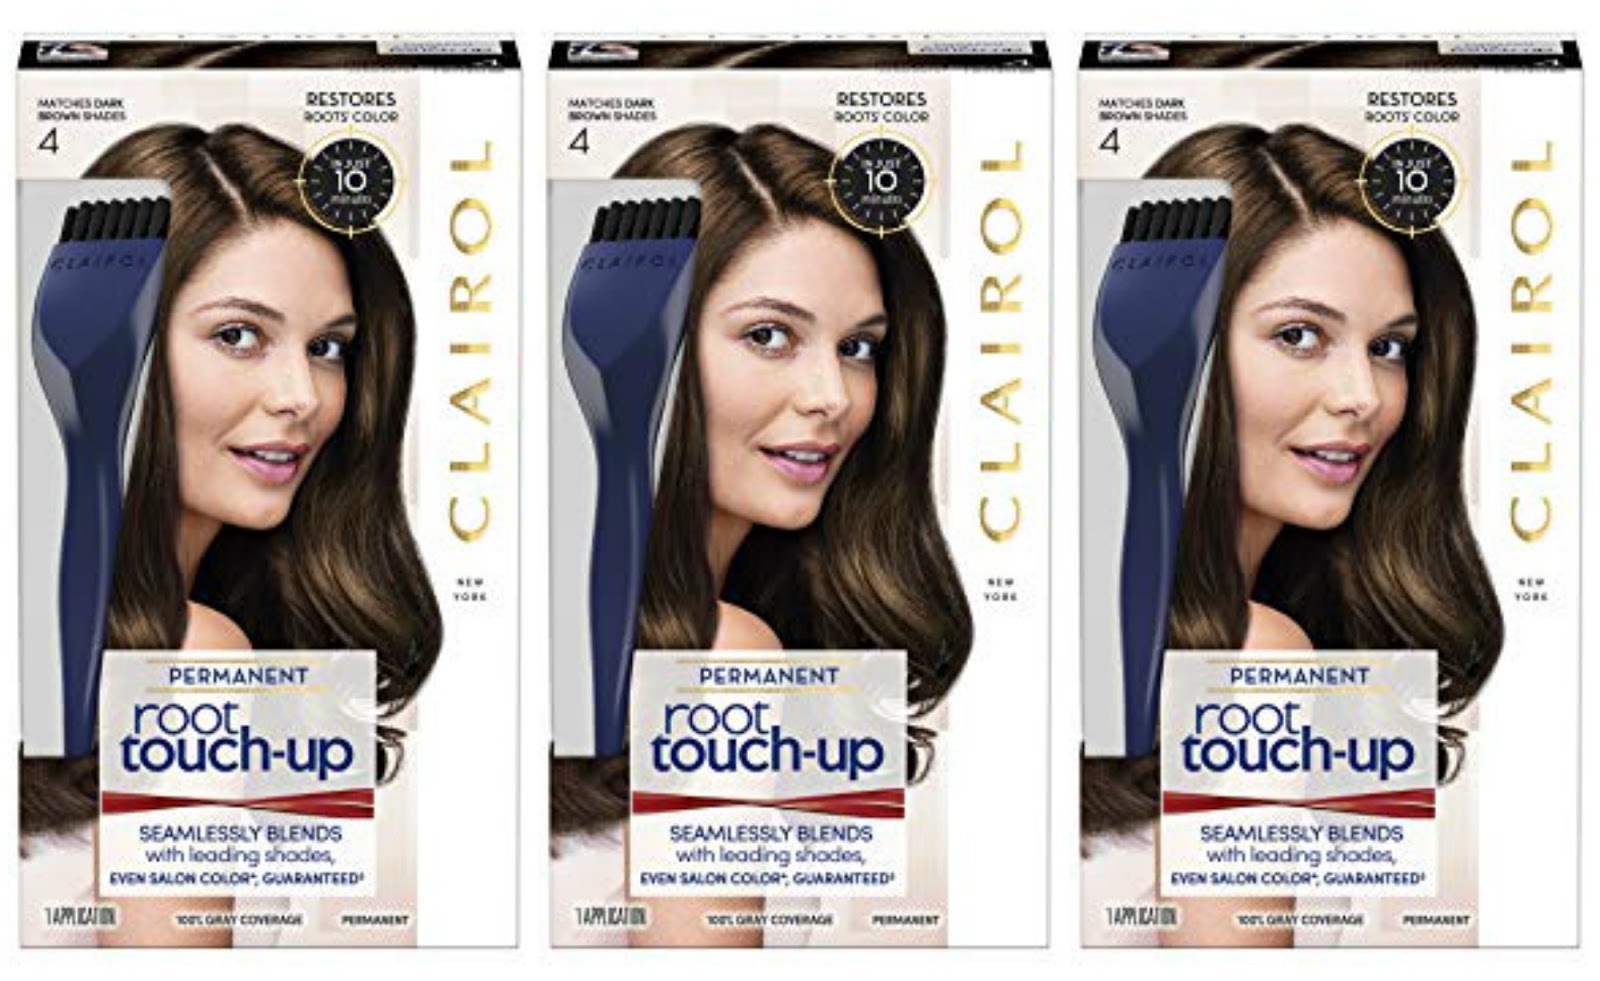 7. Clairol Root Touch-Up Permanent Hair Color Creme, 9A Light Ash Blonde - wide 9